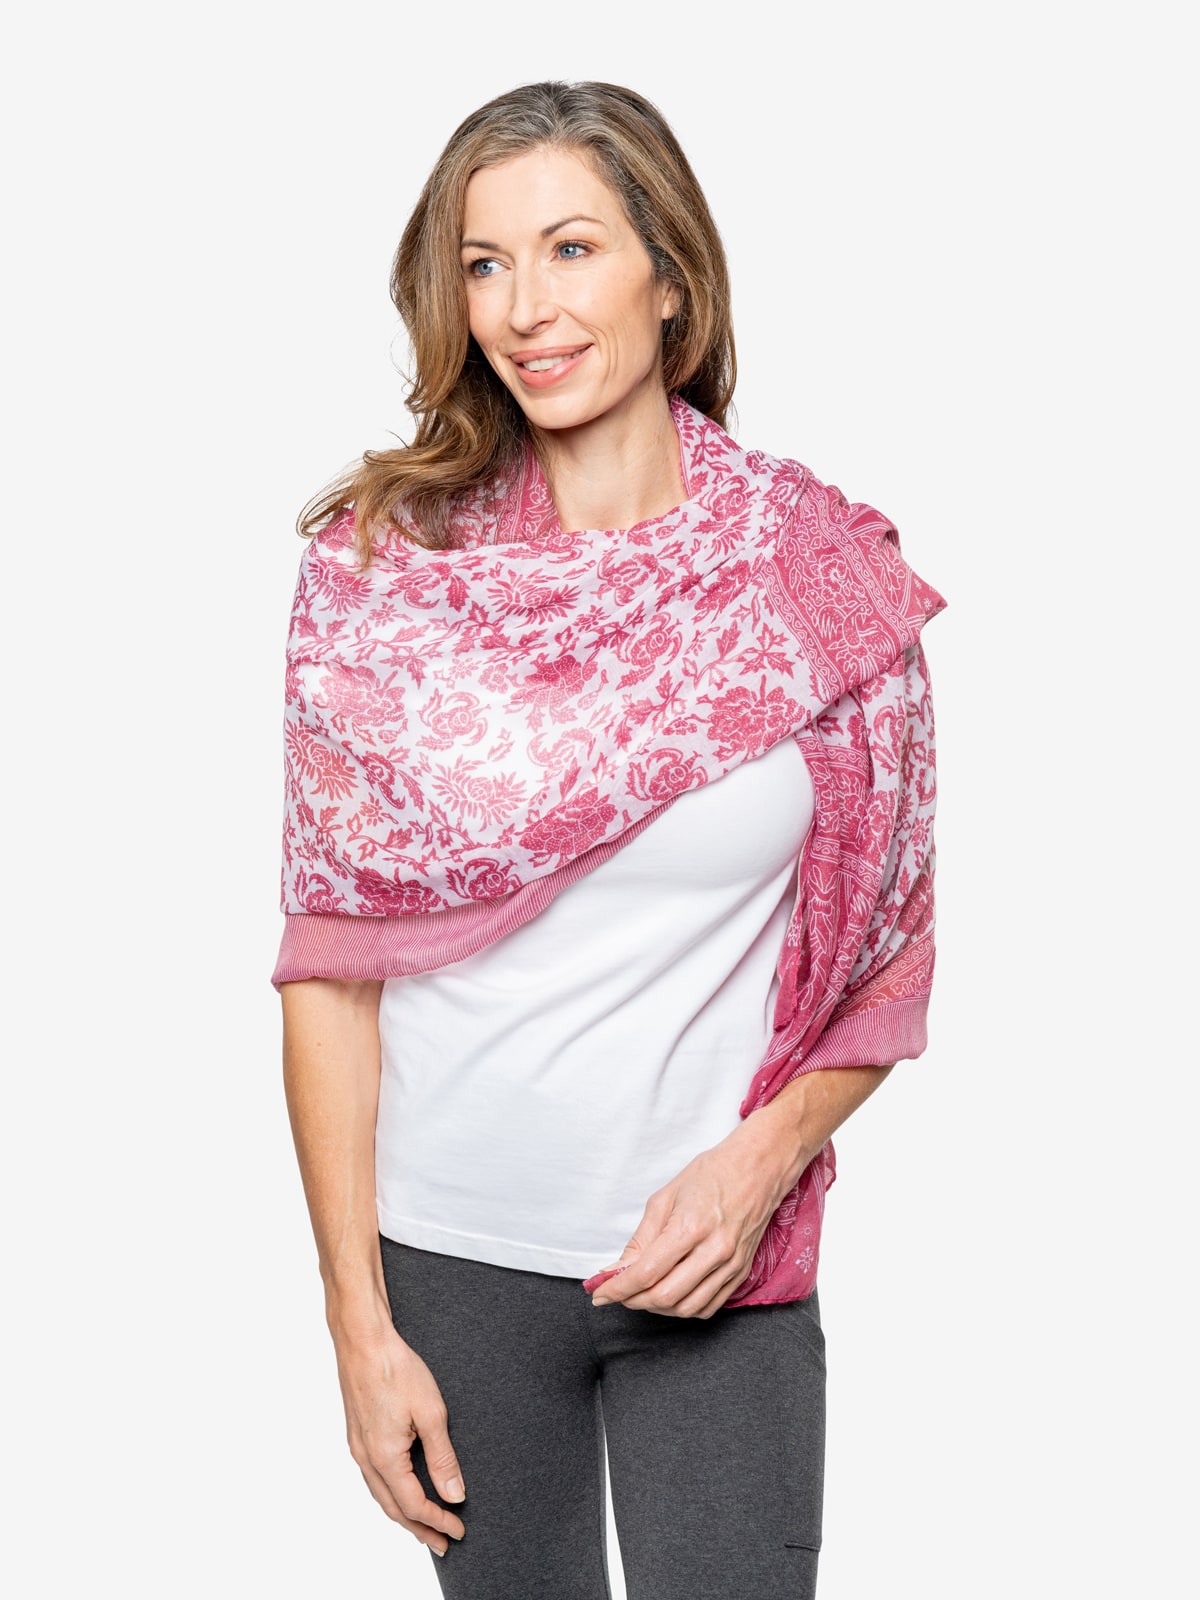 Insect Shield Versatile Wrap Scarf